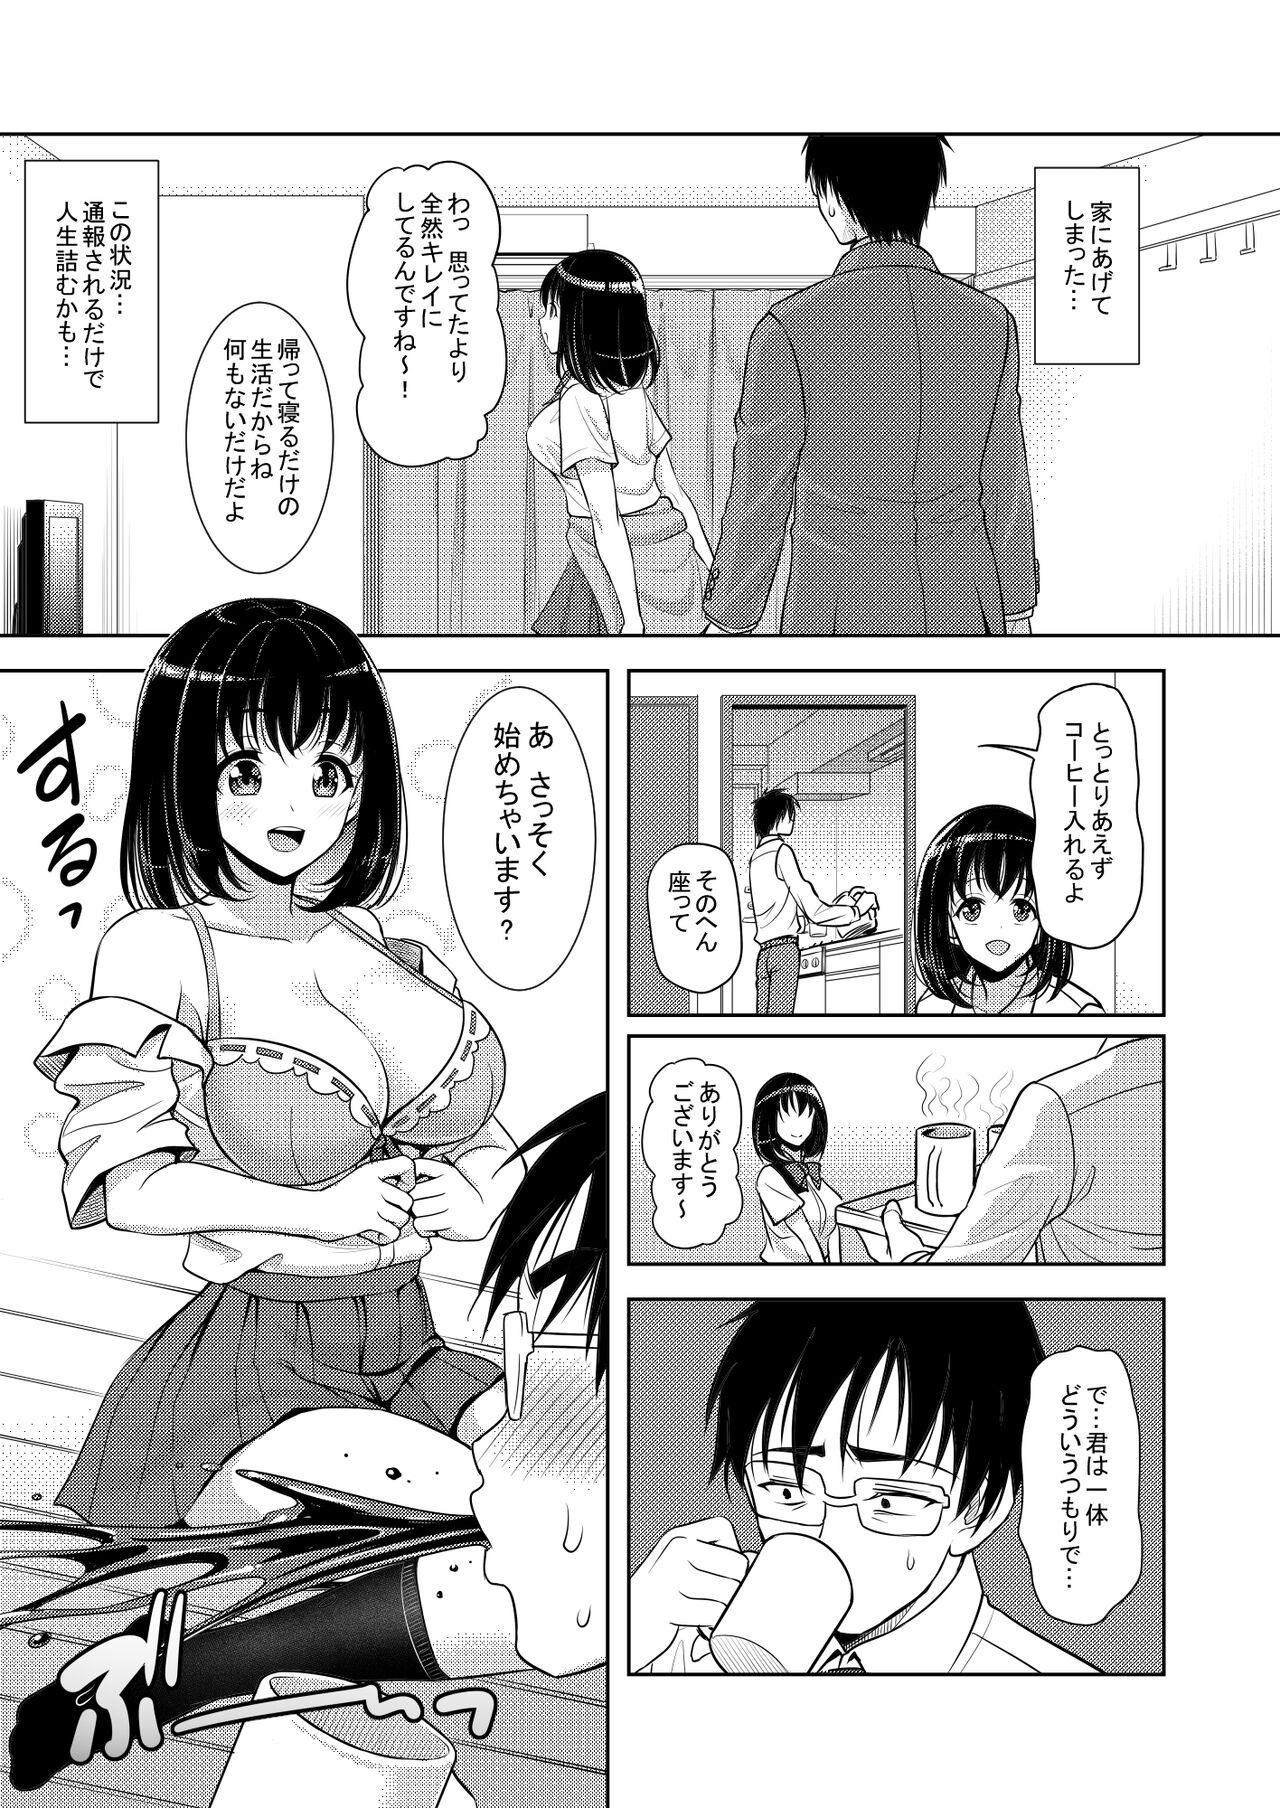 Shaven ゆるふわびっち Con - Page 6